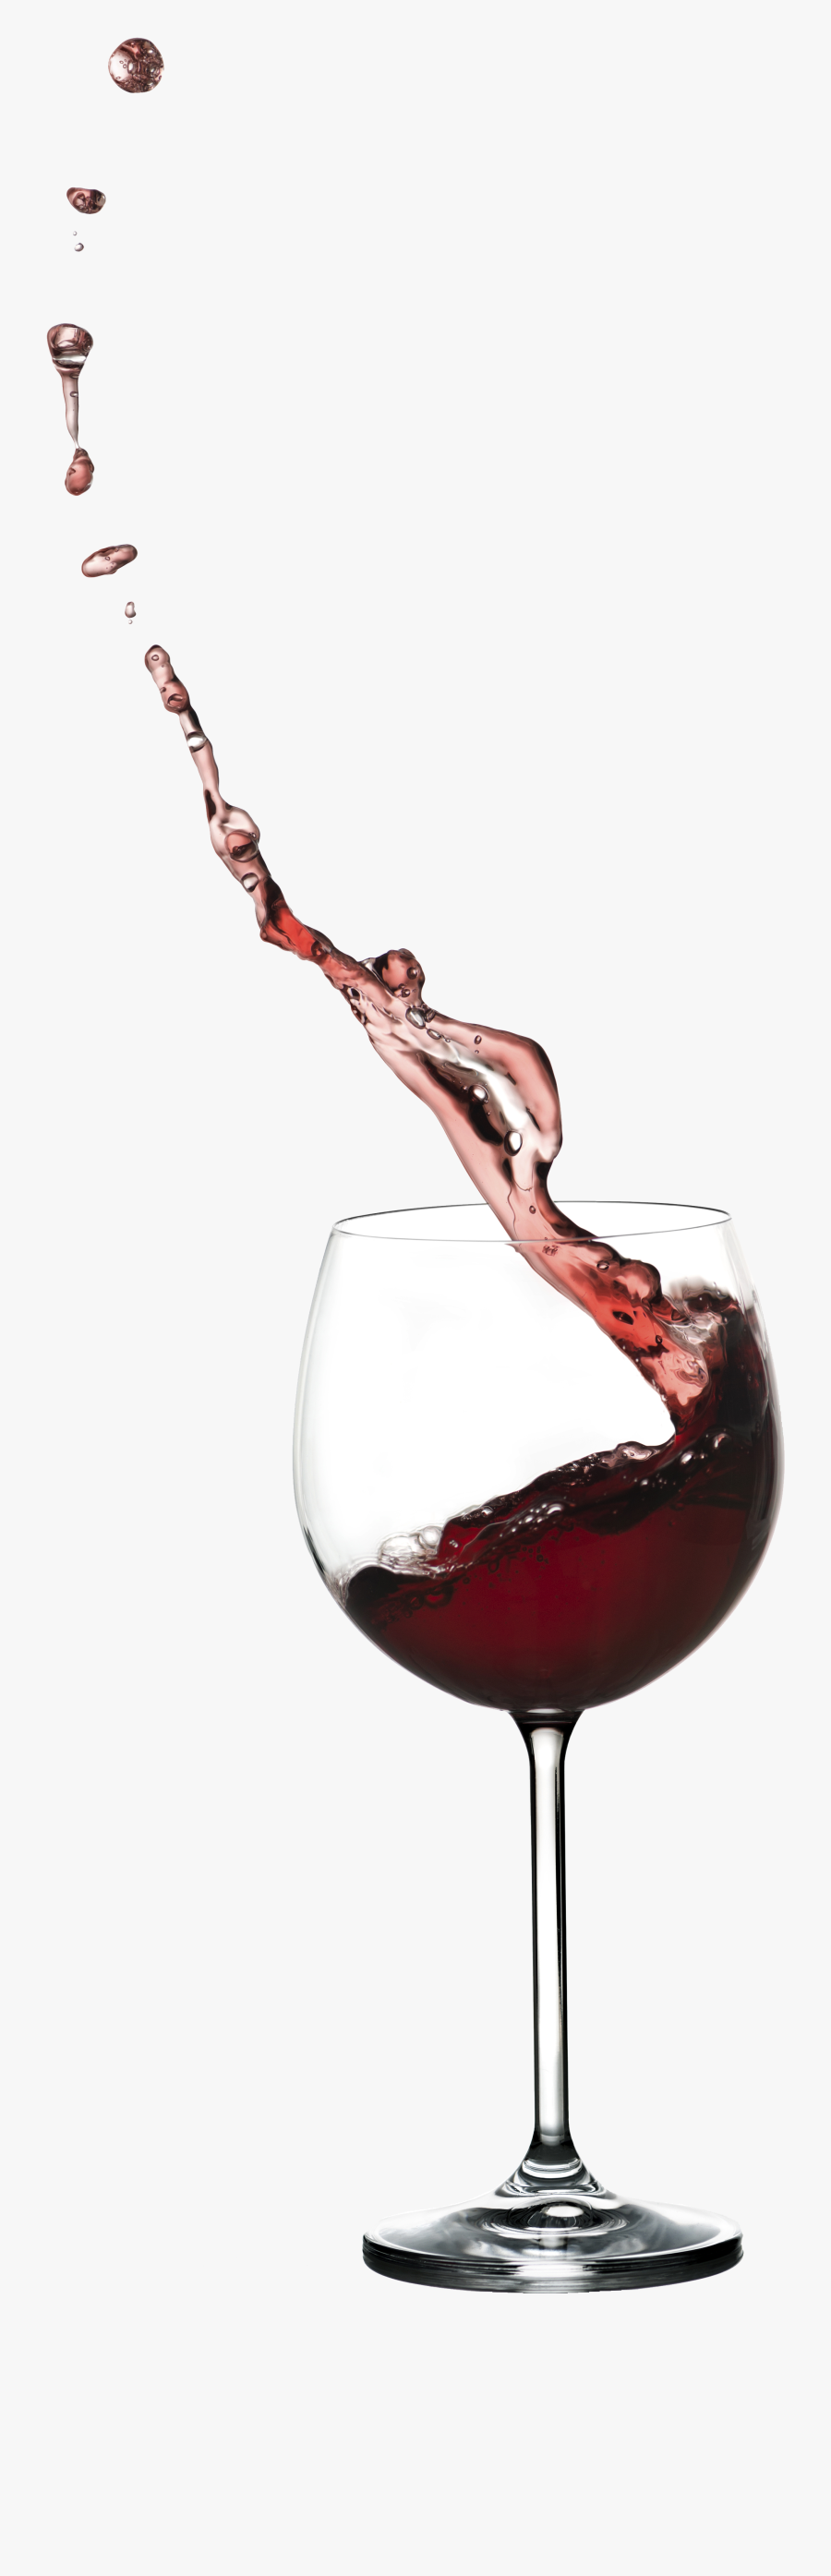 Transparent Red Wine Glass Png - Wine Glass On Floor Transparent Background, Transparent Clipart